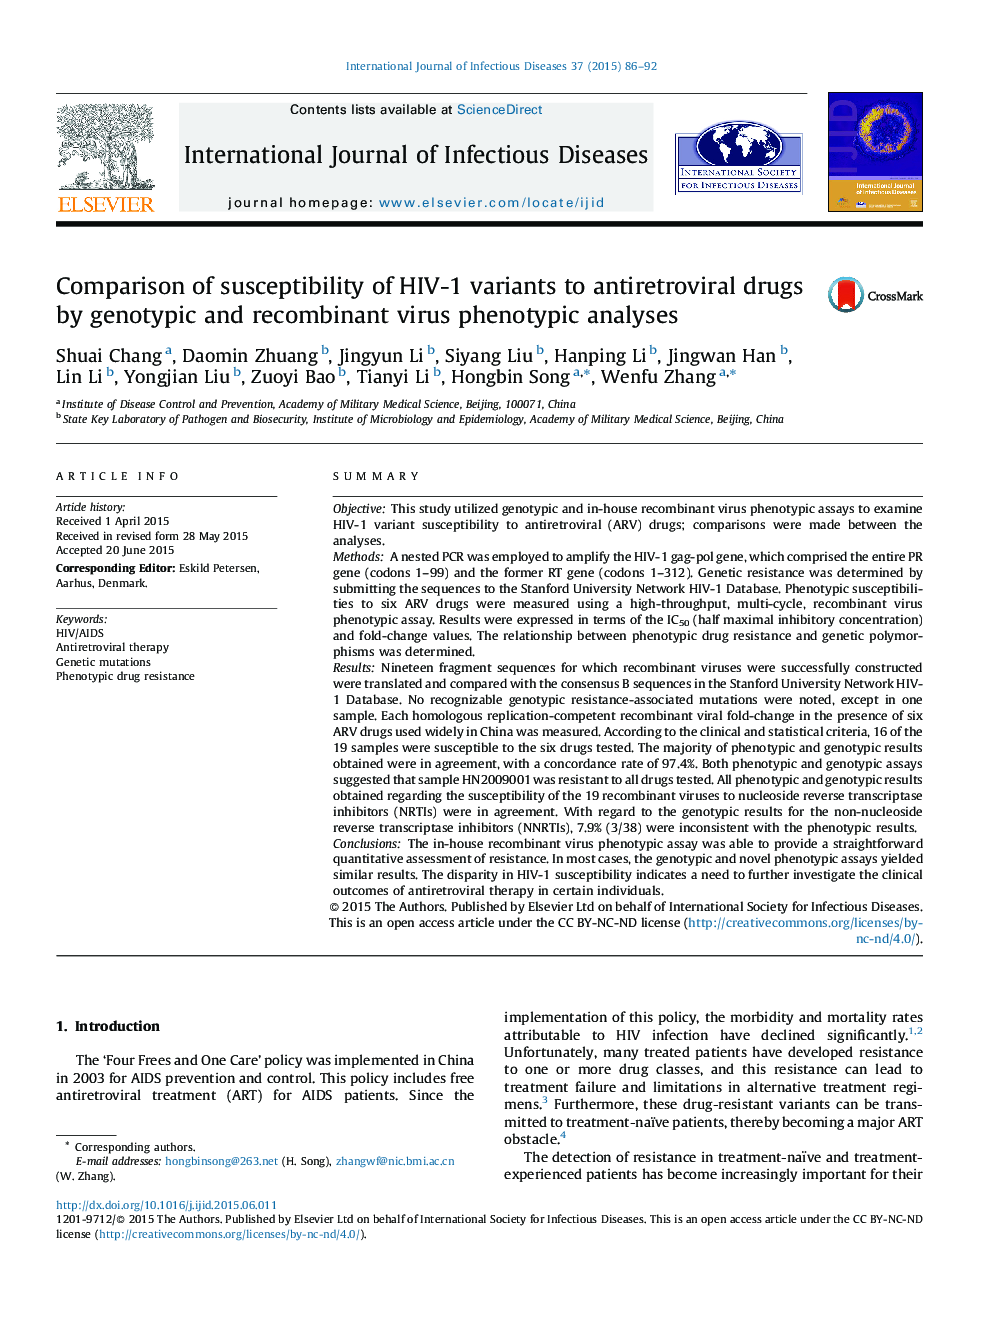 Comparison of susceptibility of HIV-1 variants to antiretroviral drugs by genotypic and recombinant virus phenotypic analyses